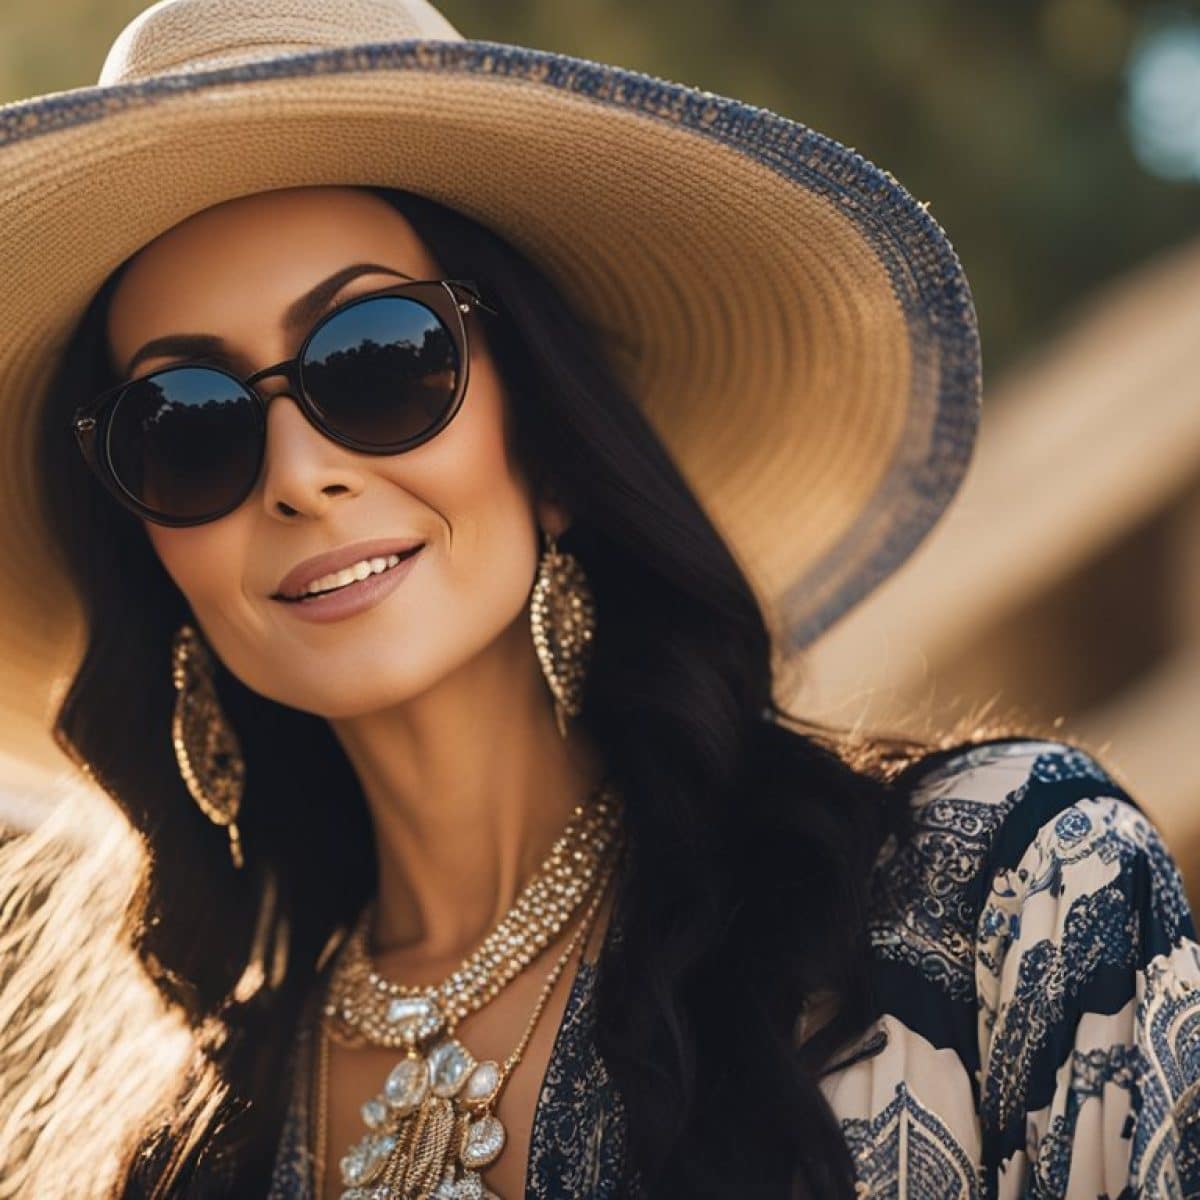 A woman with a Bohemian Chic Look wearing sunglasses and a hat, reminiscent of Cher.